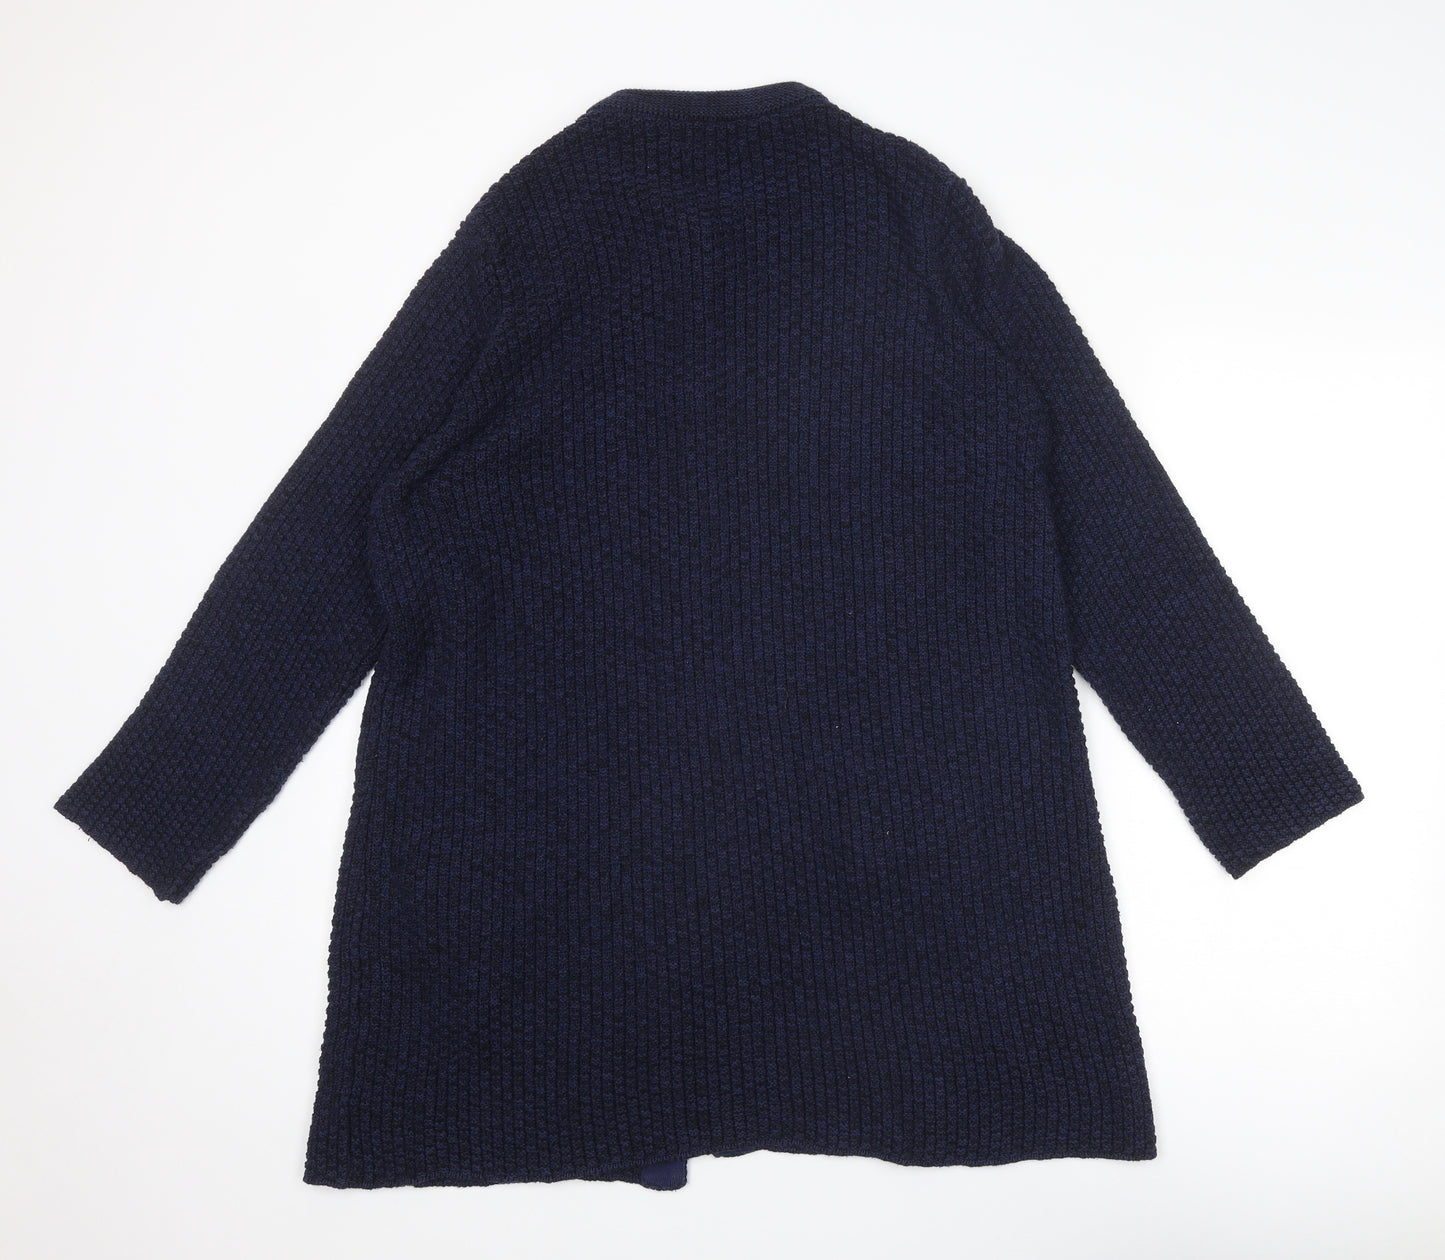 Serenity by Indiska Womens Blue Round Neck Cotton Cardigan Jumper Size L